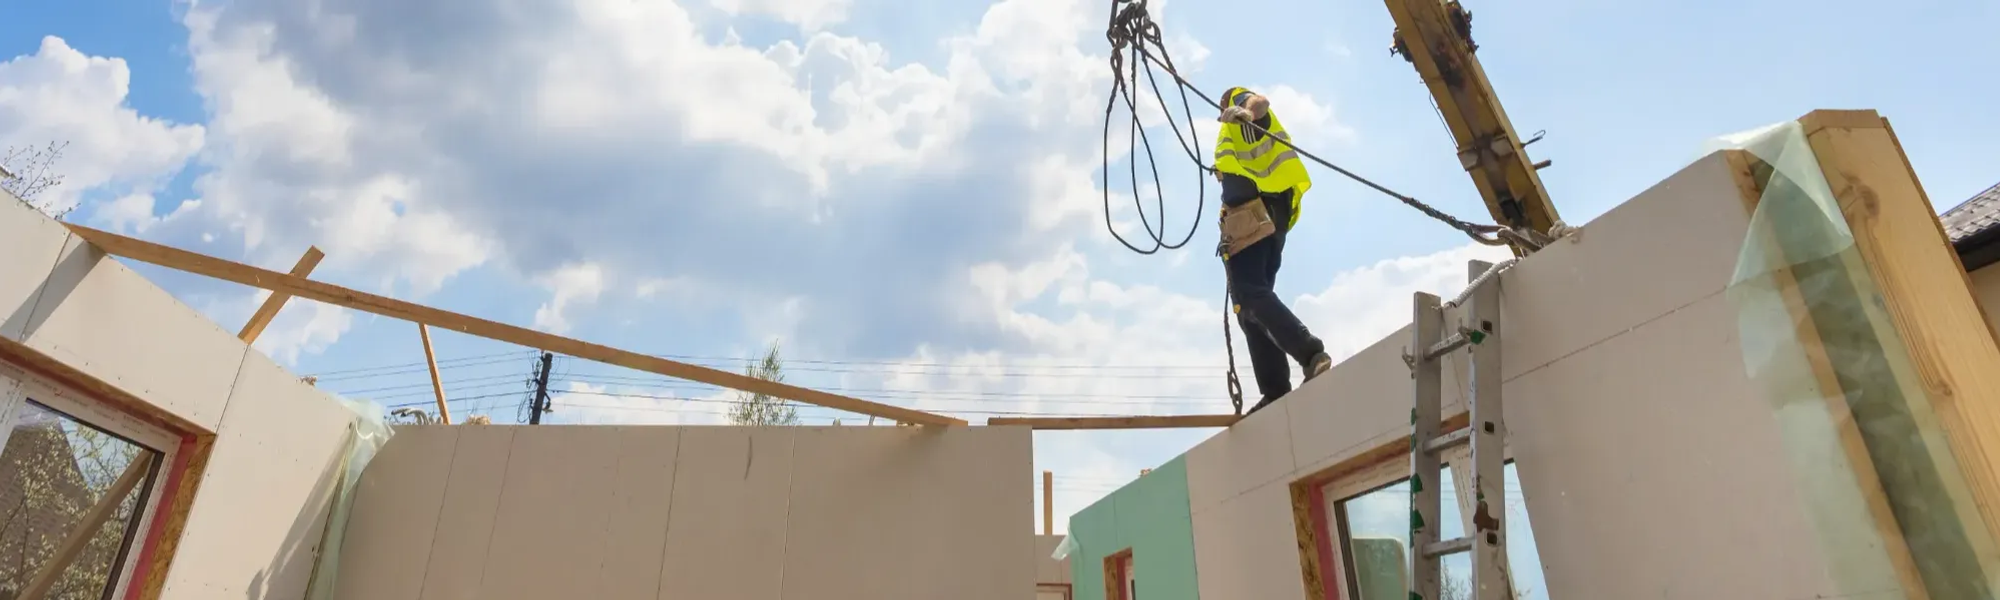 Construction worker overseeing a modular house build